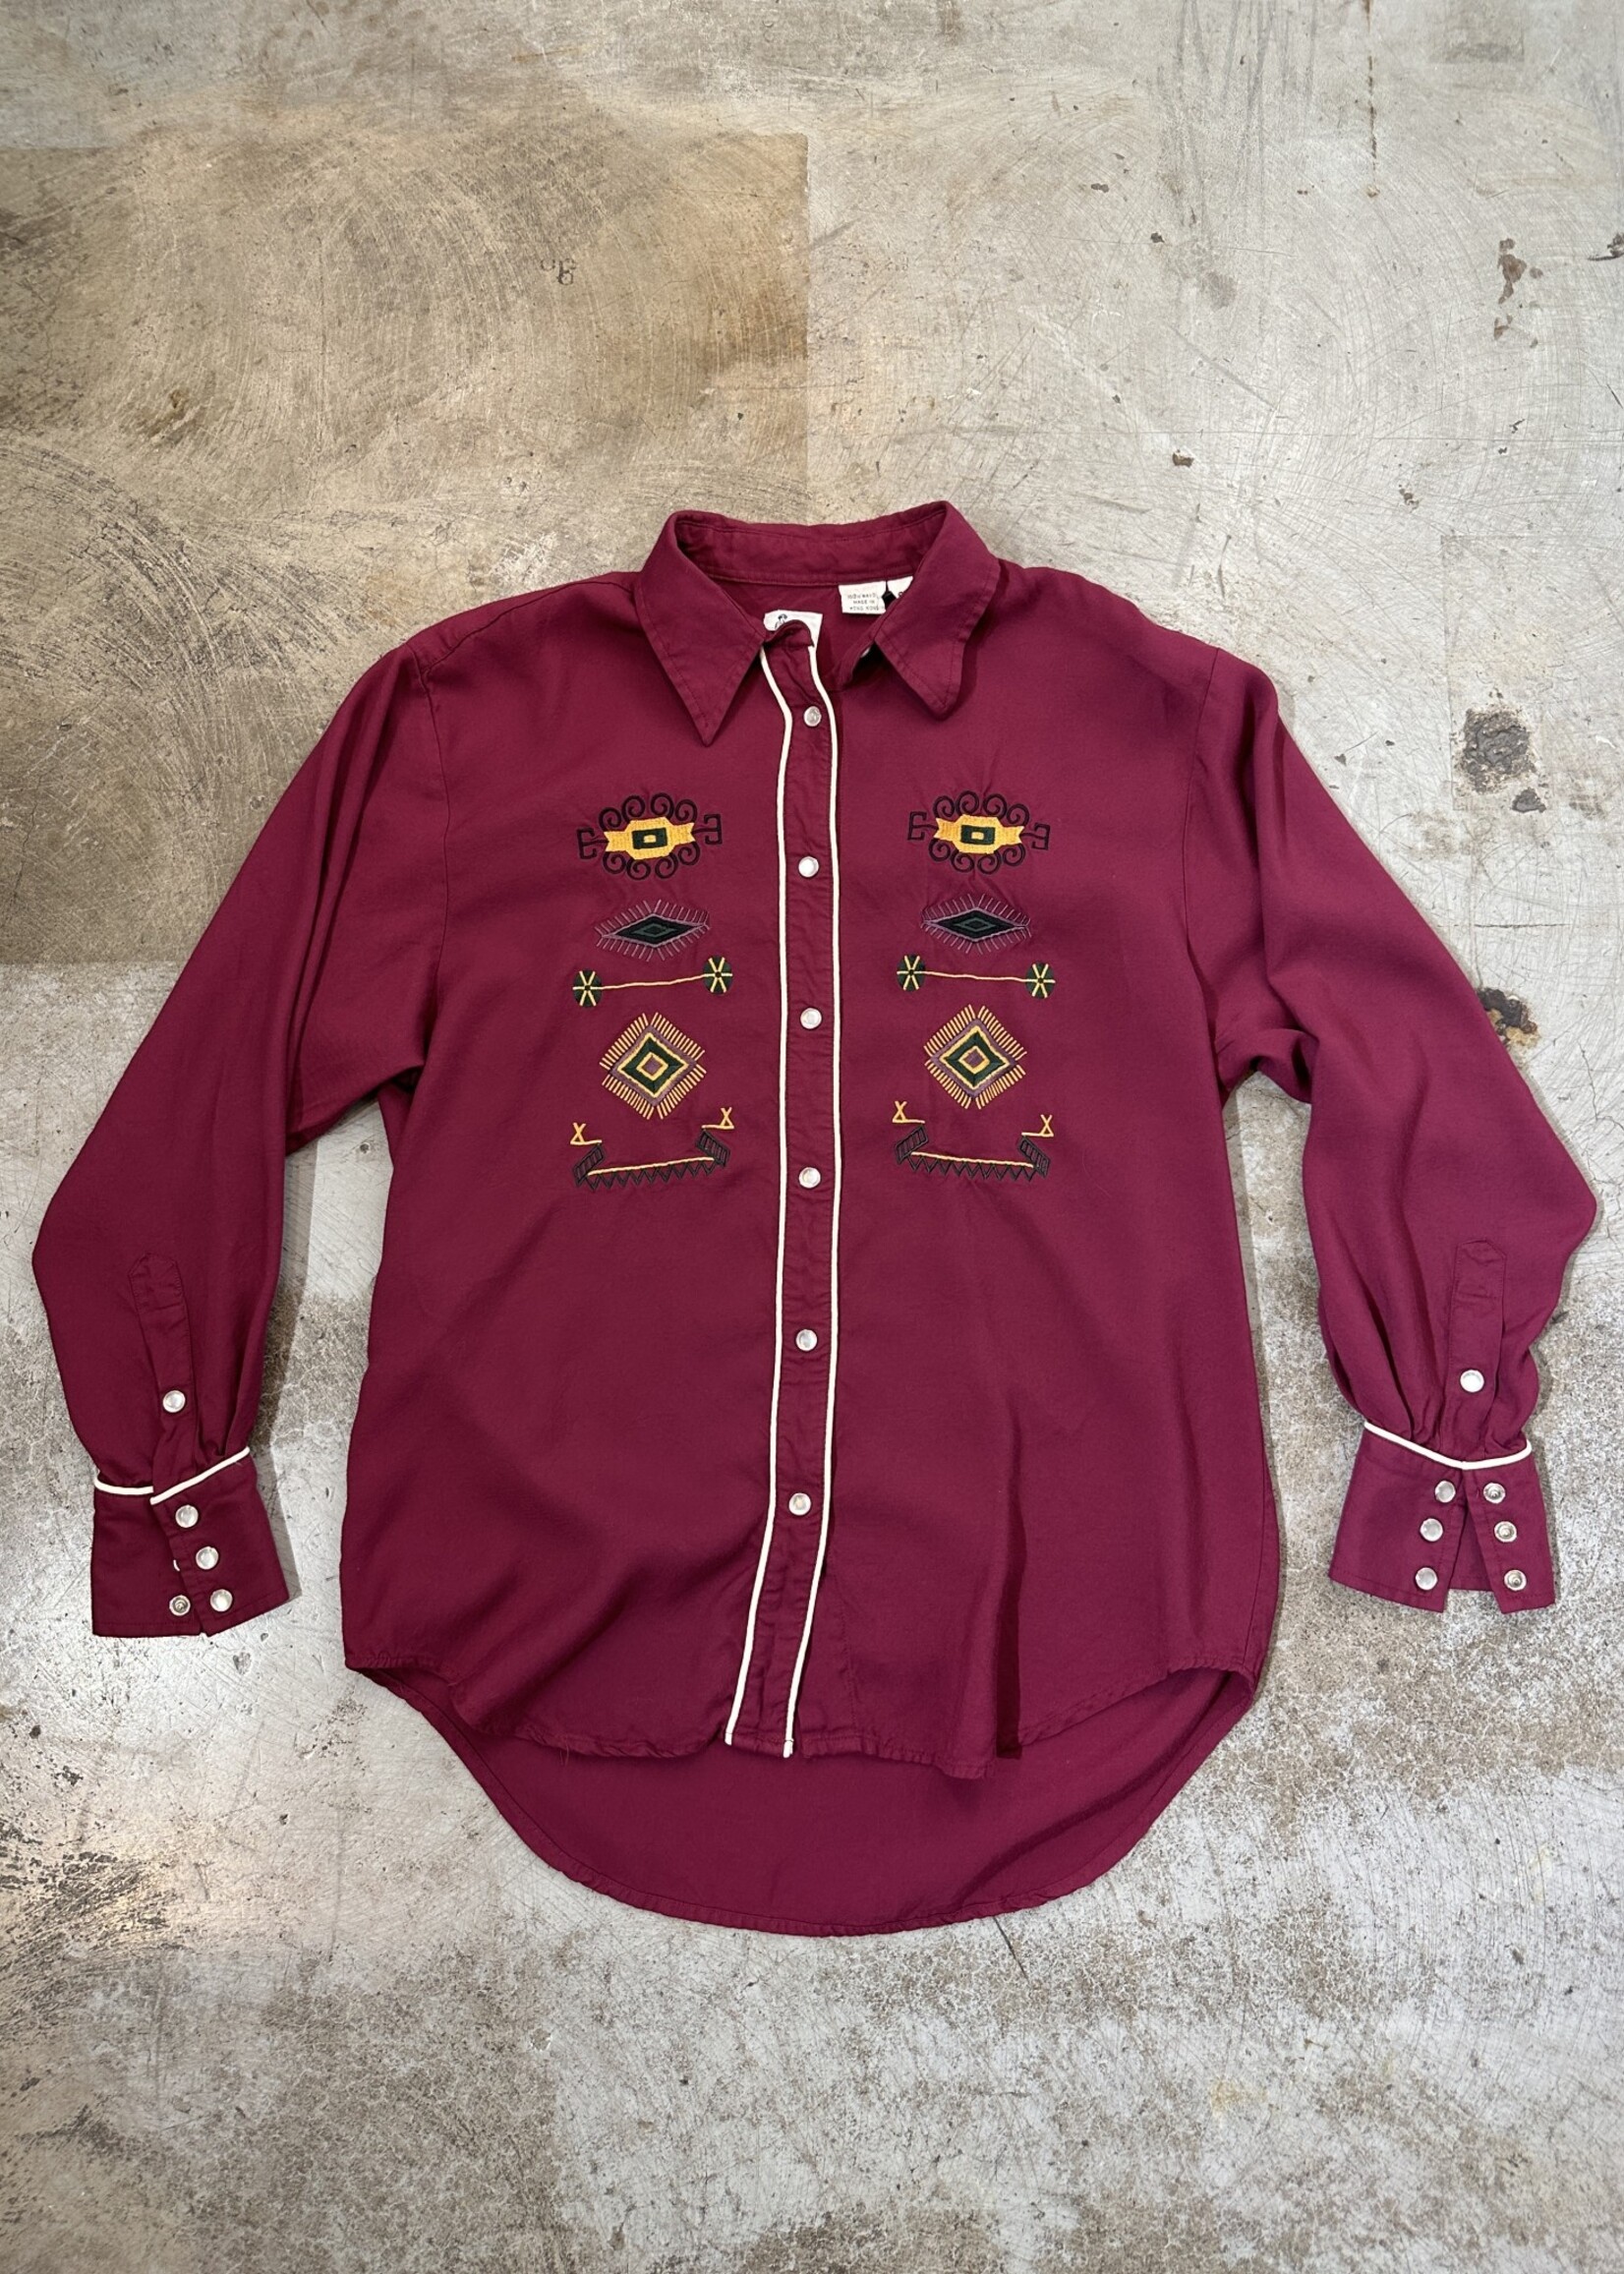 Twickers Maroon Embroidered Button Up S